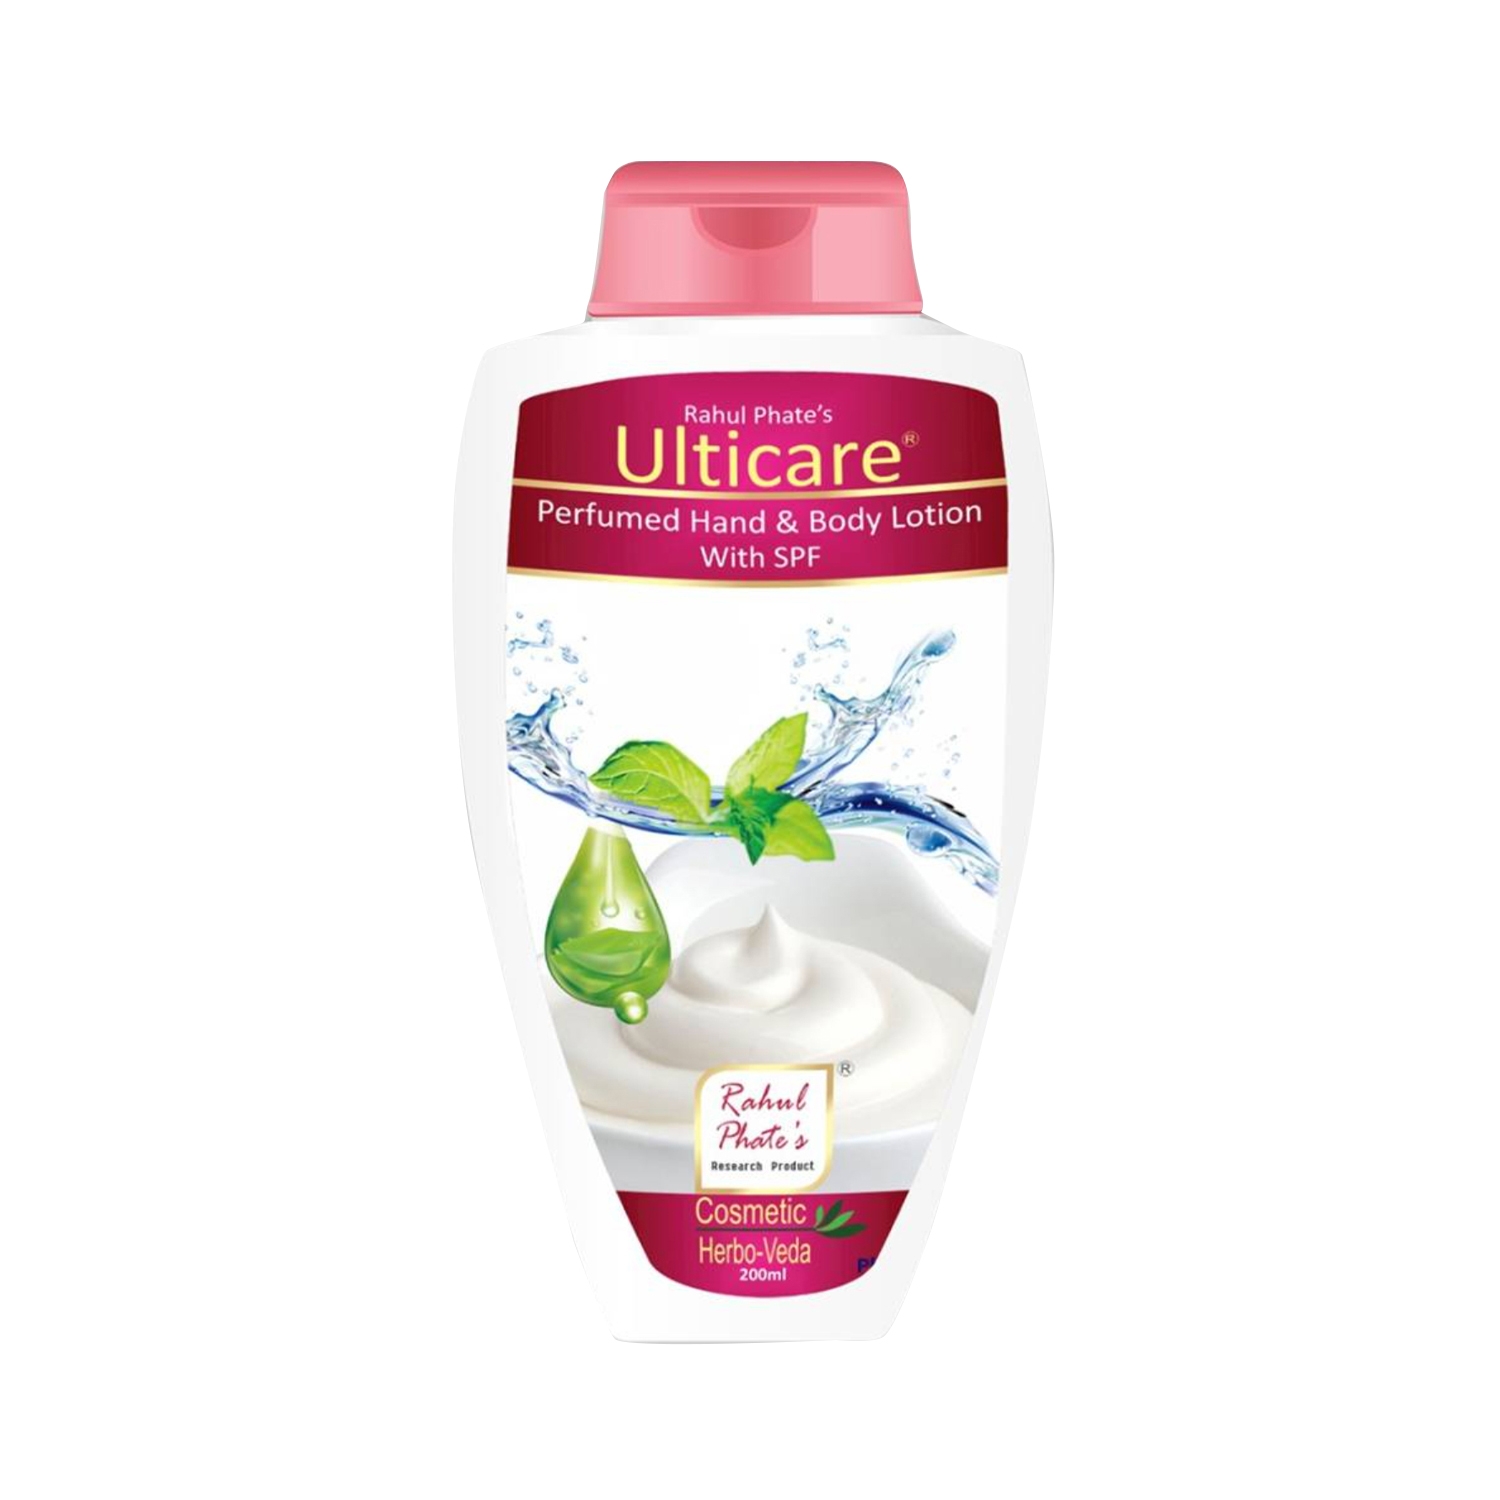 Rahul Phate's Research Product | Rahul Phate's Research Product Ulticare Hand & Body Lotion (200ml)